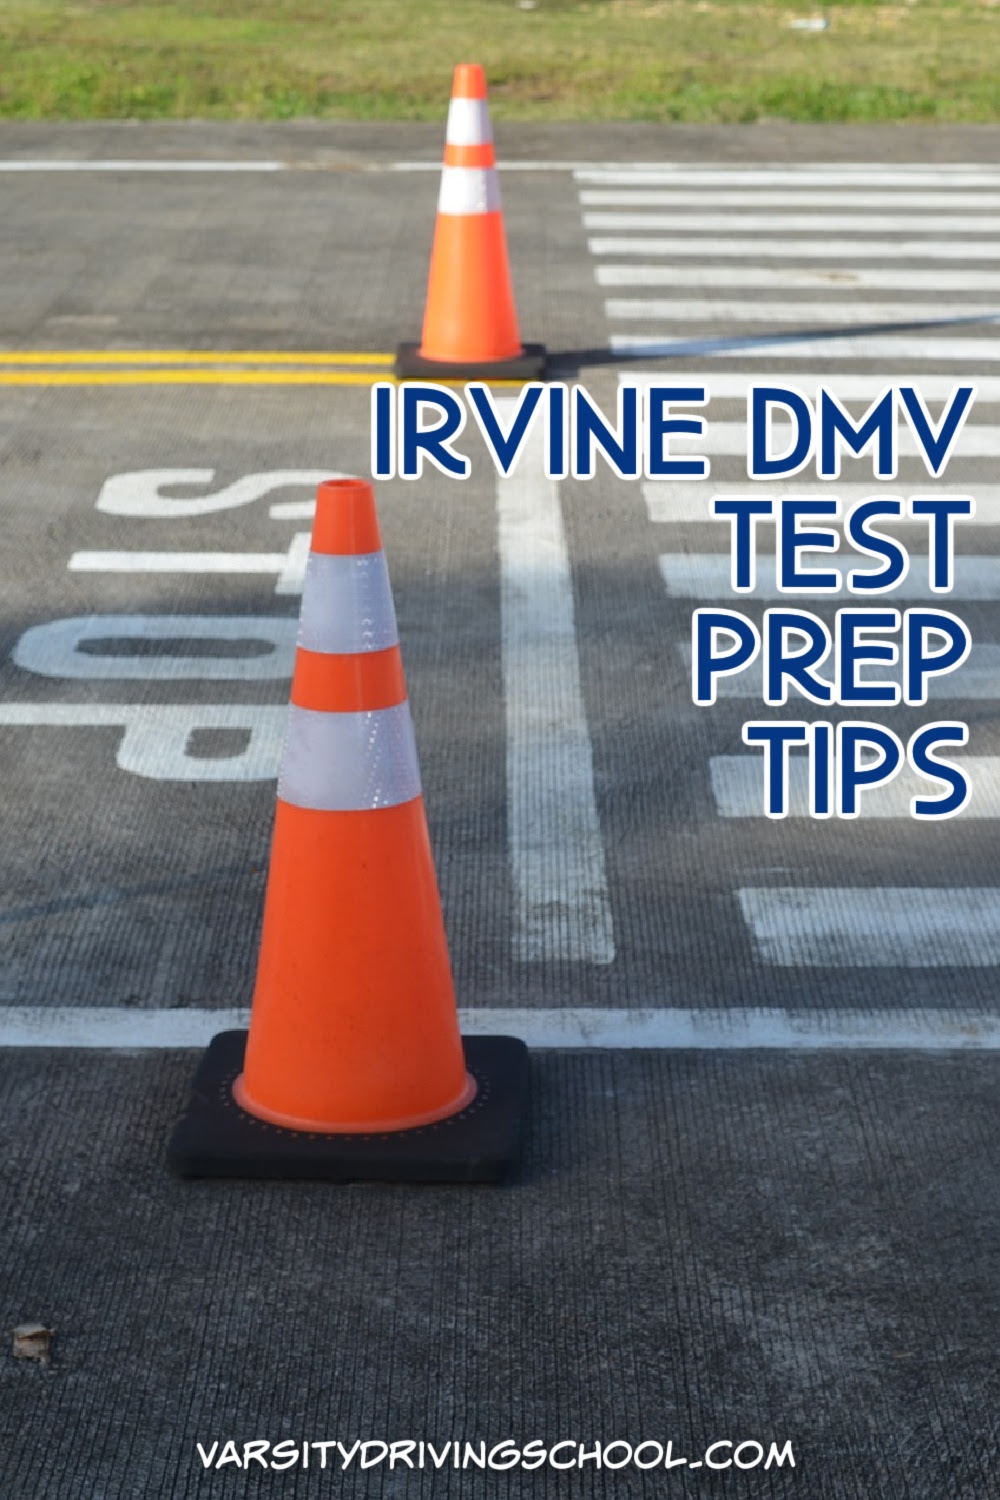 Students should take advantage of the Irvine DMV drivers ed test prep tips to increase their odds of passing their Irvine driving test!